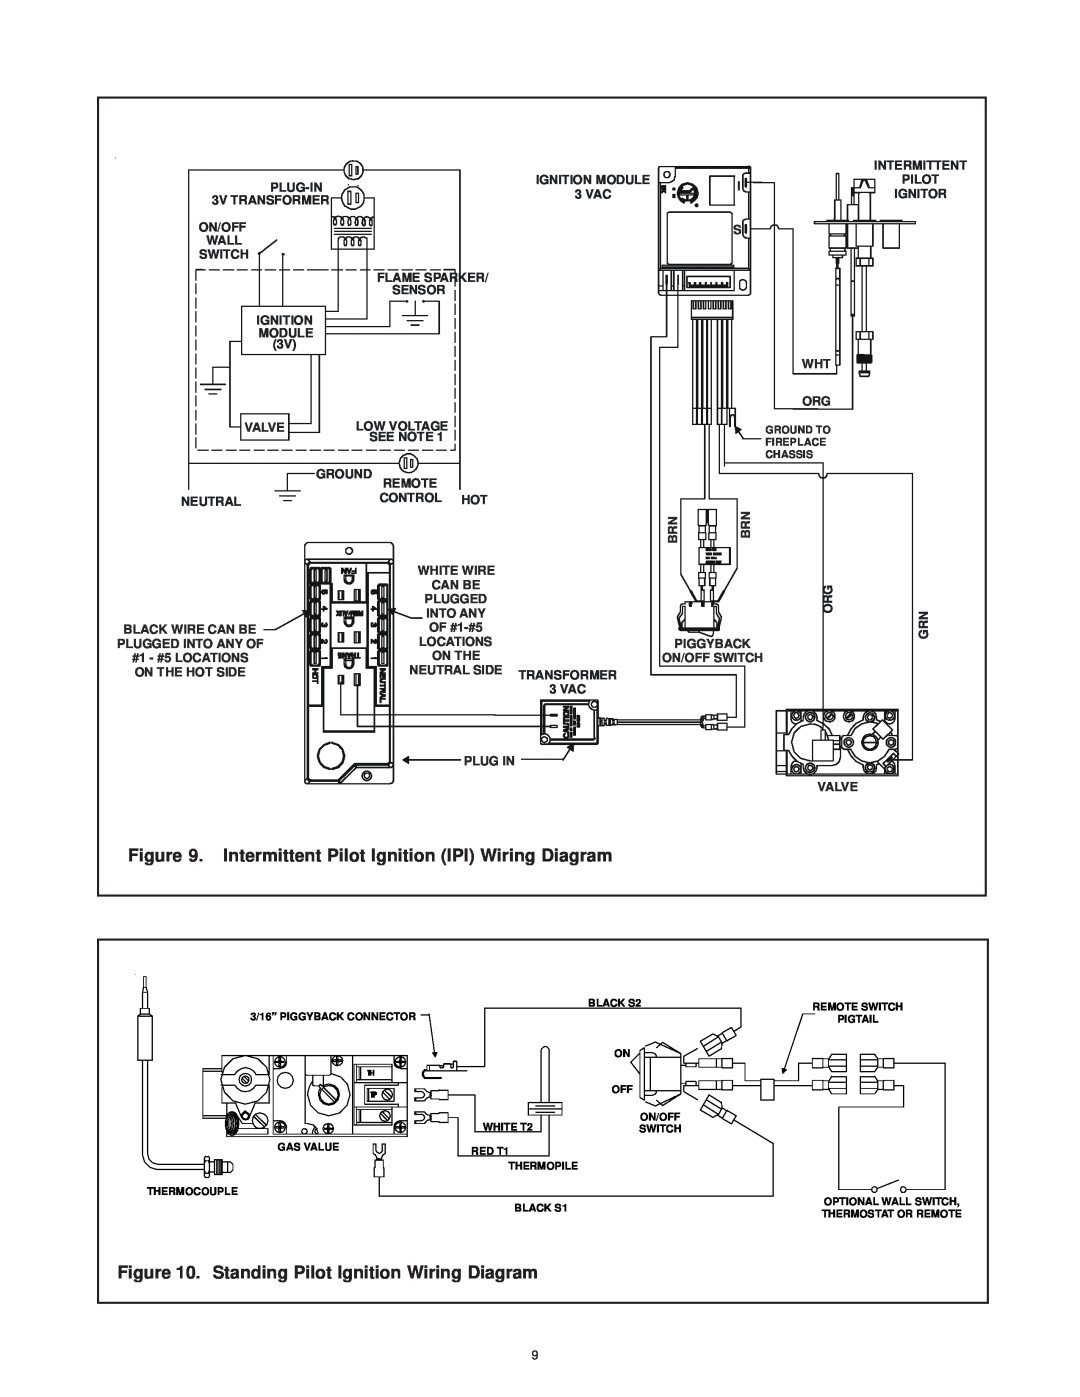 Hearth and Home Technologies SMART-STAT-II Standing Pilot Ignition Wiring Diagram, Plug-In, 3V TRANSFORMER, Flame Sparker 